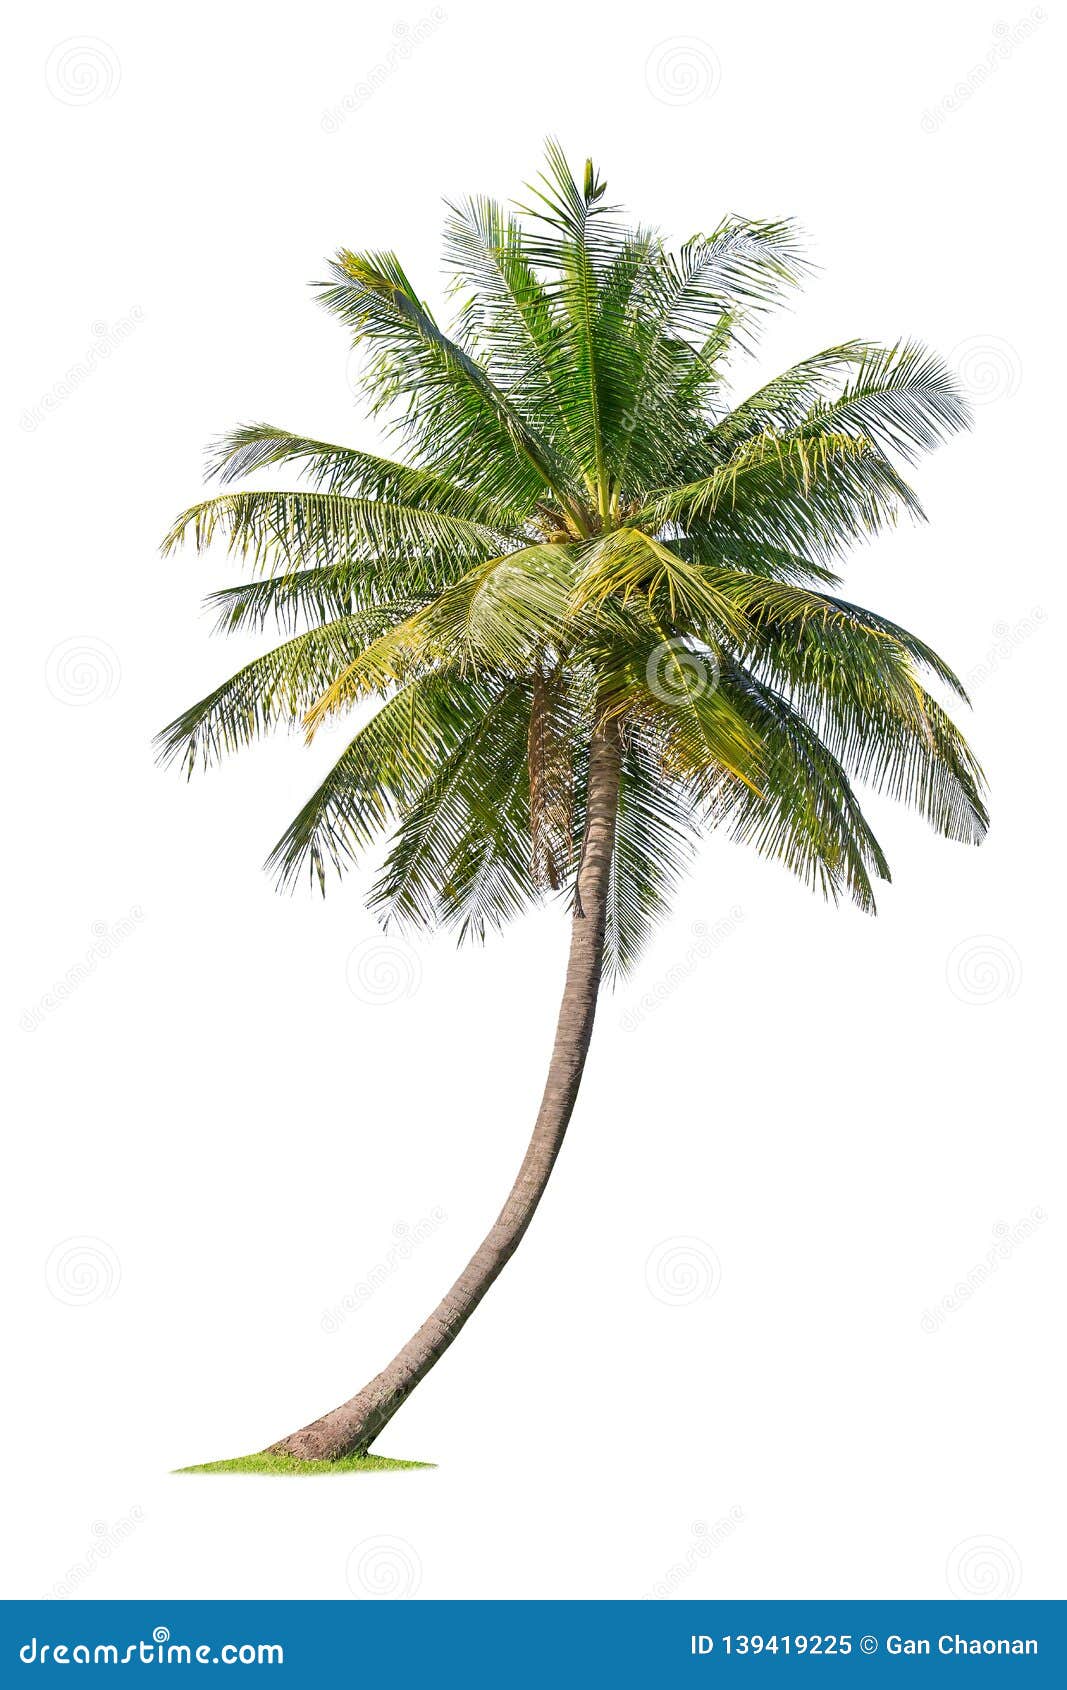 Isolated Coconut Tree On White Background Low Cost Coconut Trees Are The Economic Crops Of Thailand Stock Image Image Of Leafy Growth